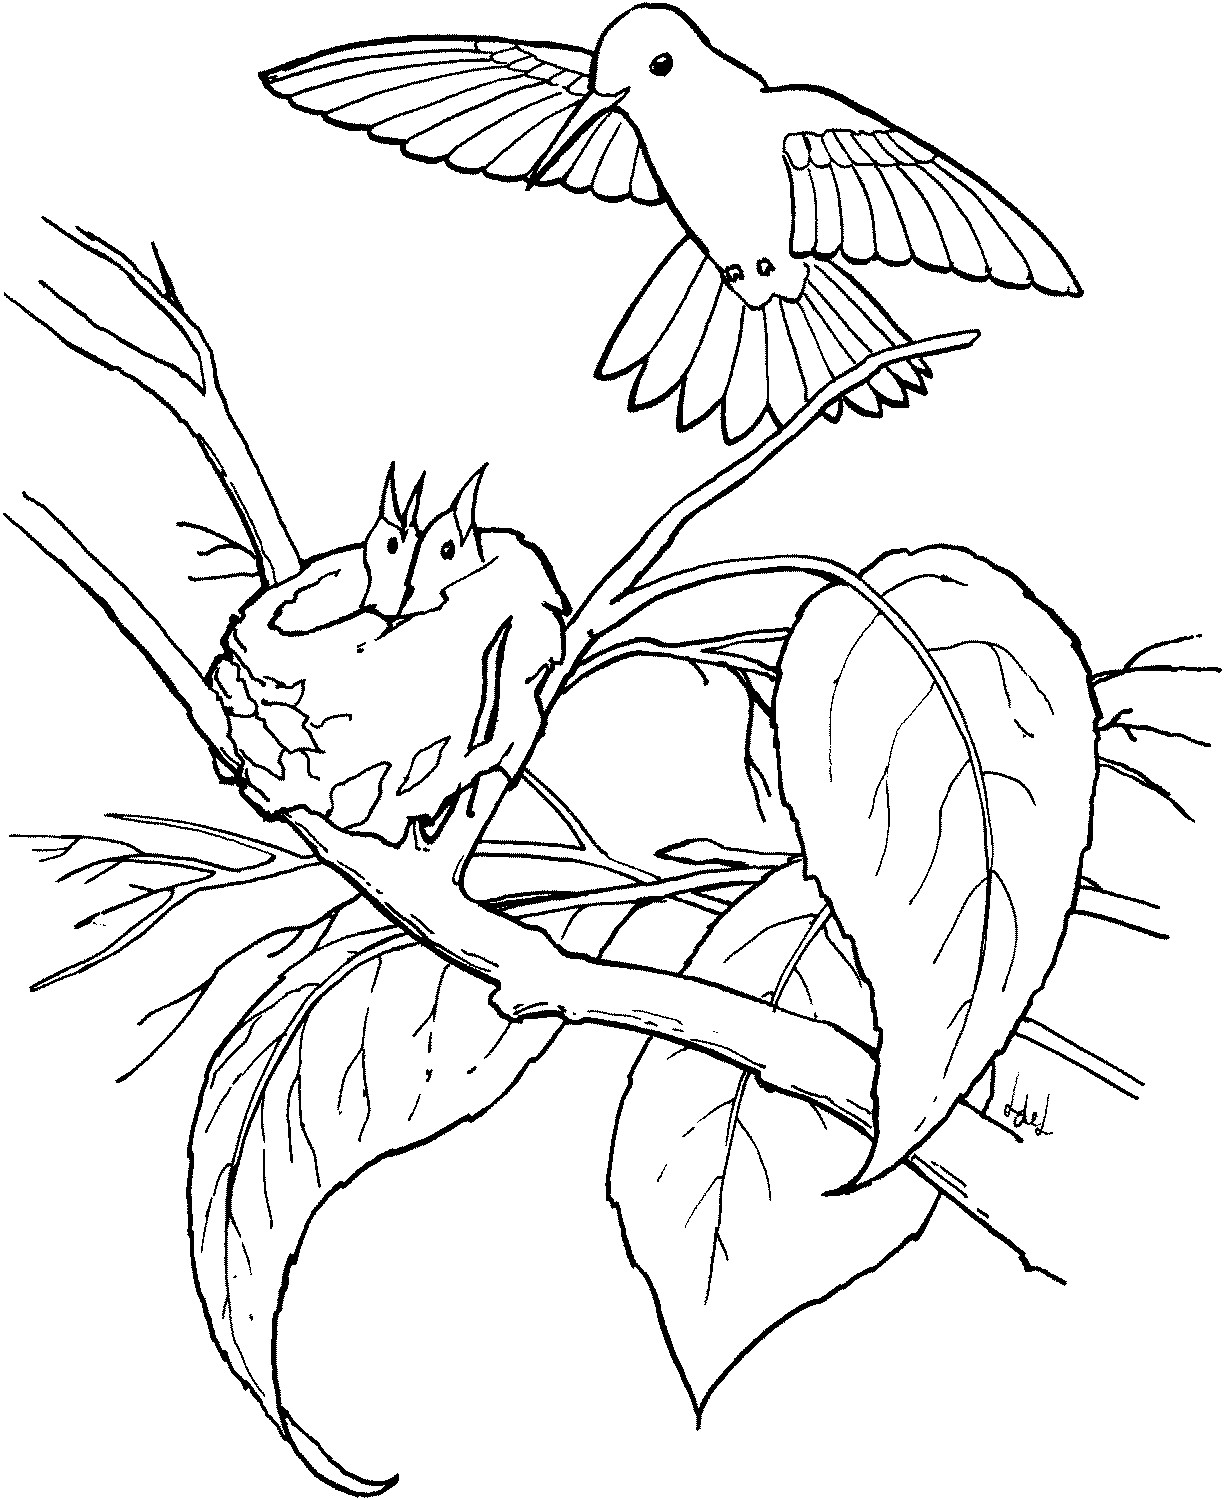 Hummingbird Coloring Pages
 Free Printable Hummingbird Coloring Pages For Kids